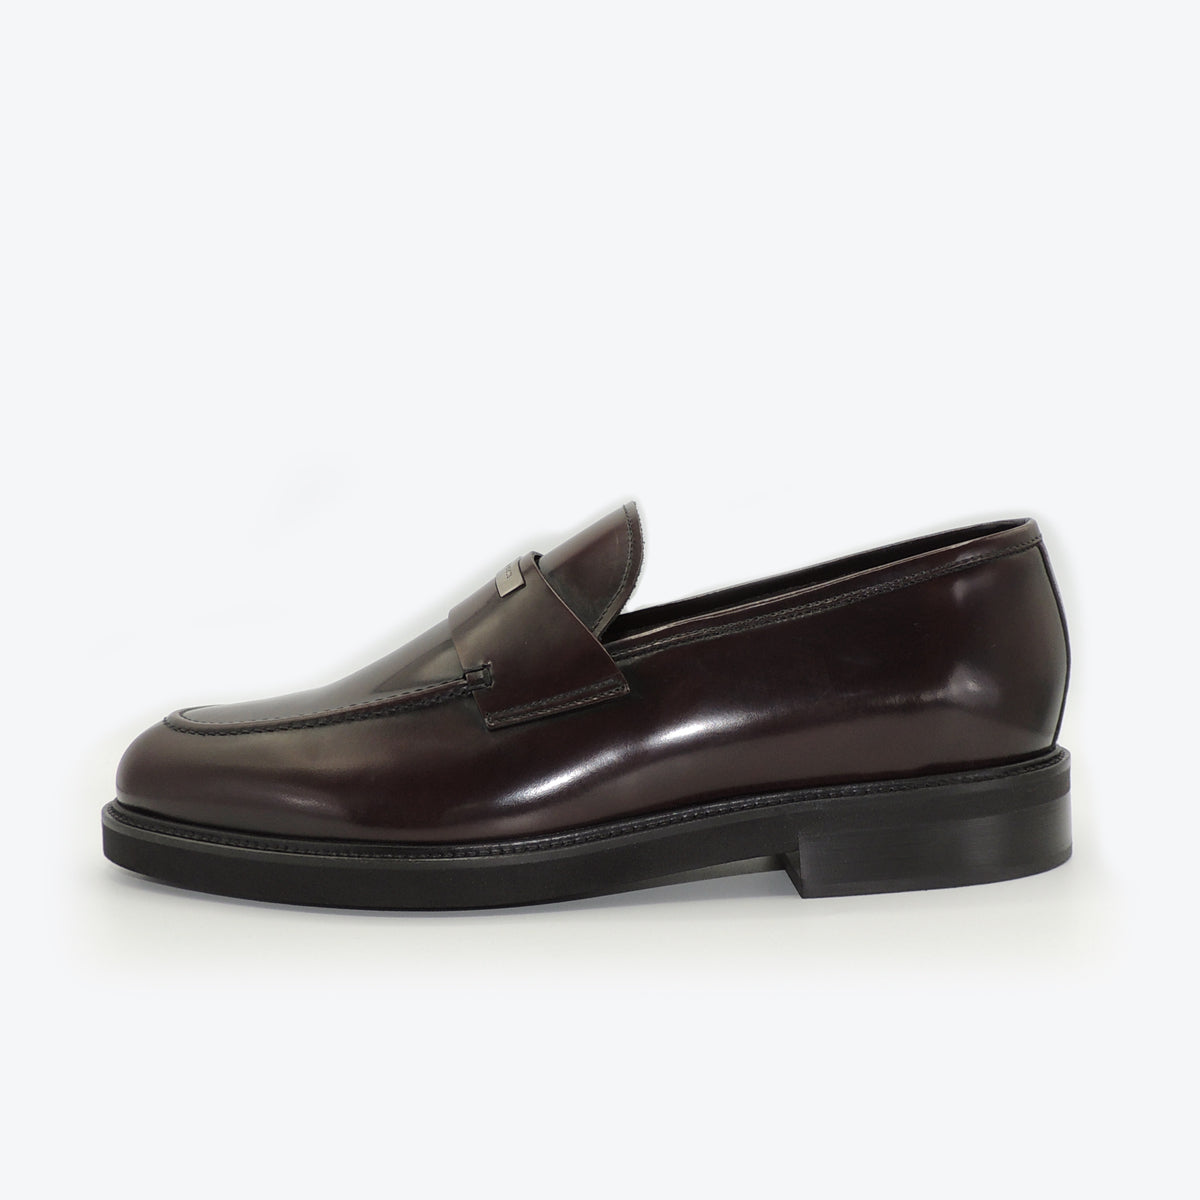 Sergio Rossi  Men's High Polished Dress Shoe in  Brown